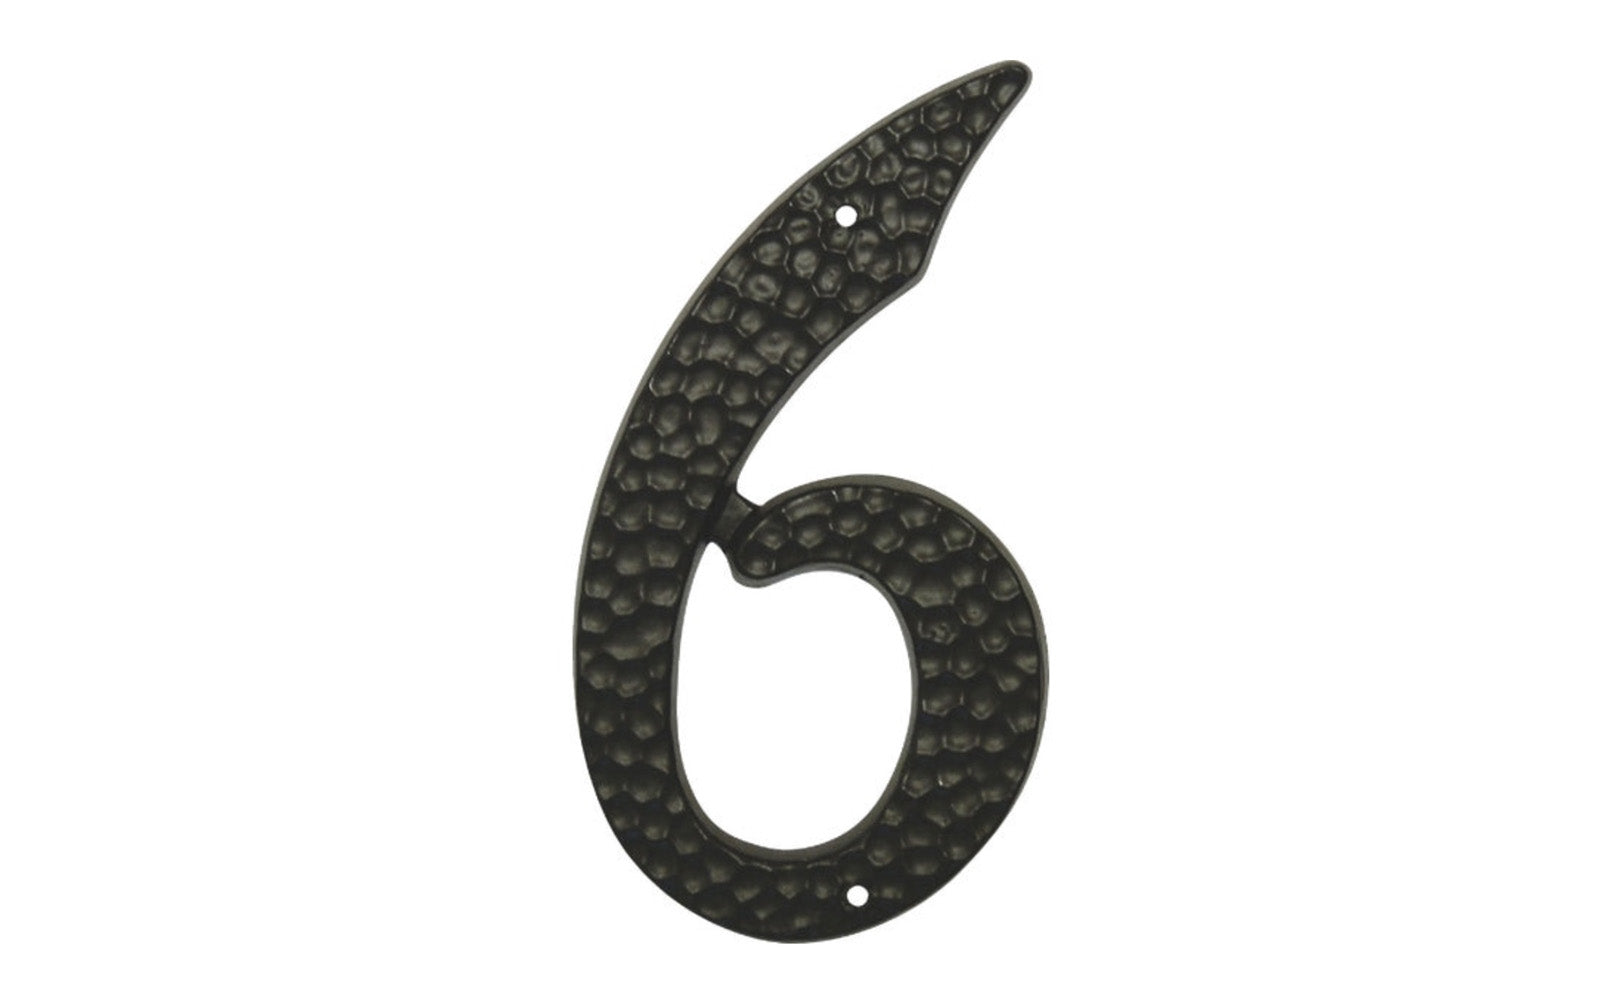 Number Six Black Hammered House Number in a 3-1/2" Size. Made of die-cast aluminum material with a black hammered style. Mounting nails included. #6 House Number. Hy-Ko Model No. DC-3/6. 029069201067